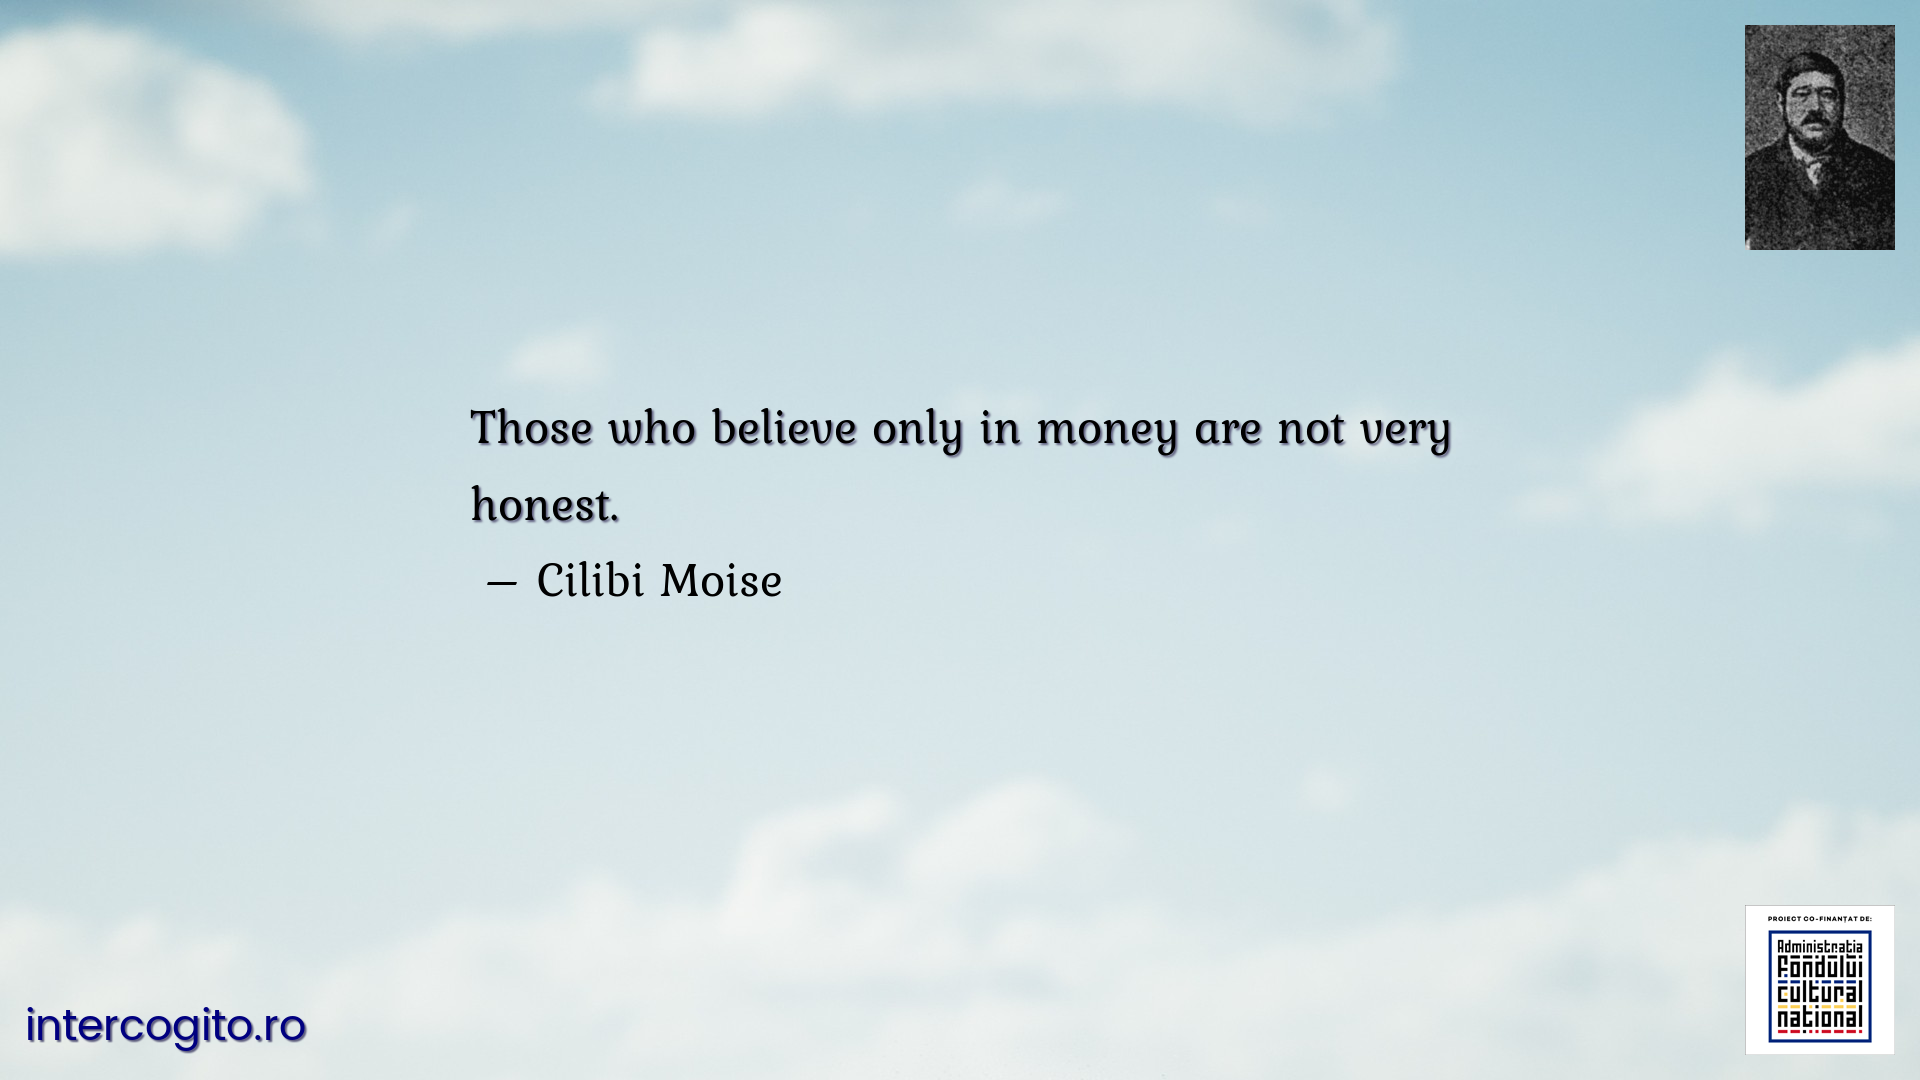 Those who believe only in money are not very honest.